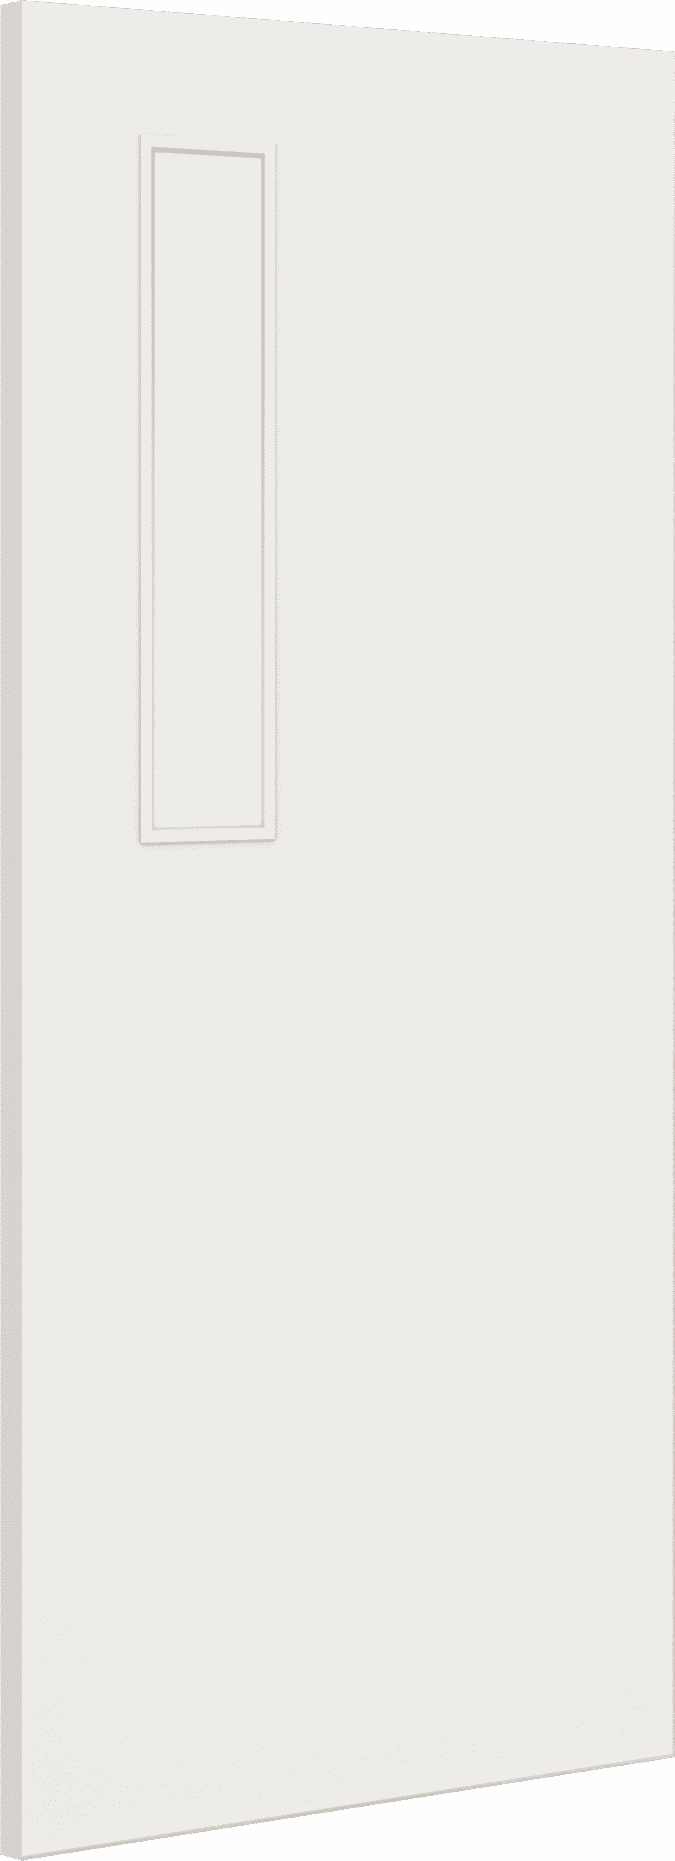 1981mm x 838mm x 44mm (33") Architectural Paint Grade White 08 Clear Glazed Fire Door Blank